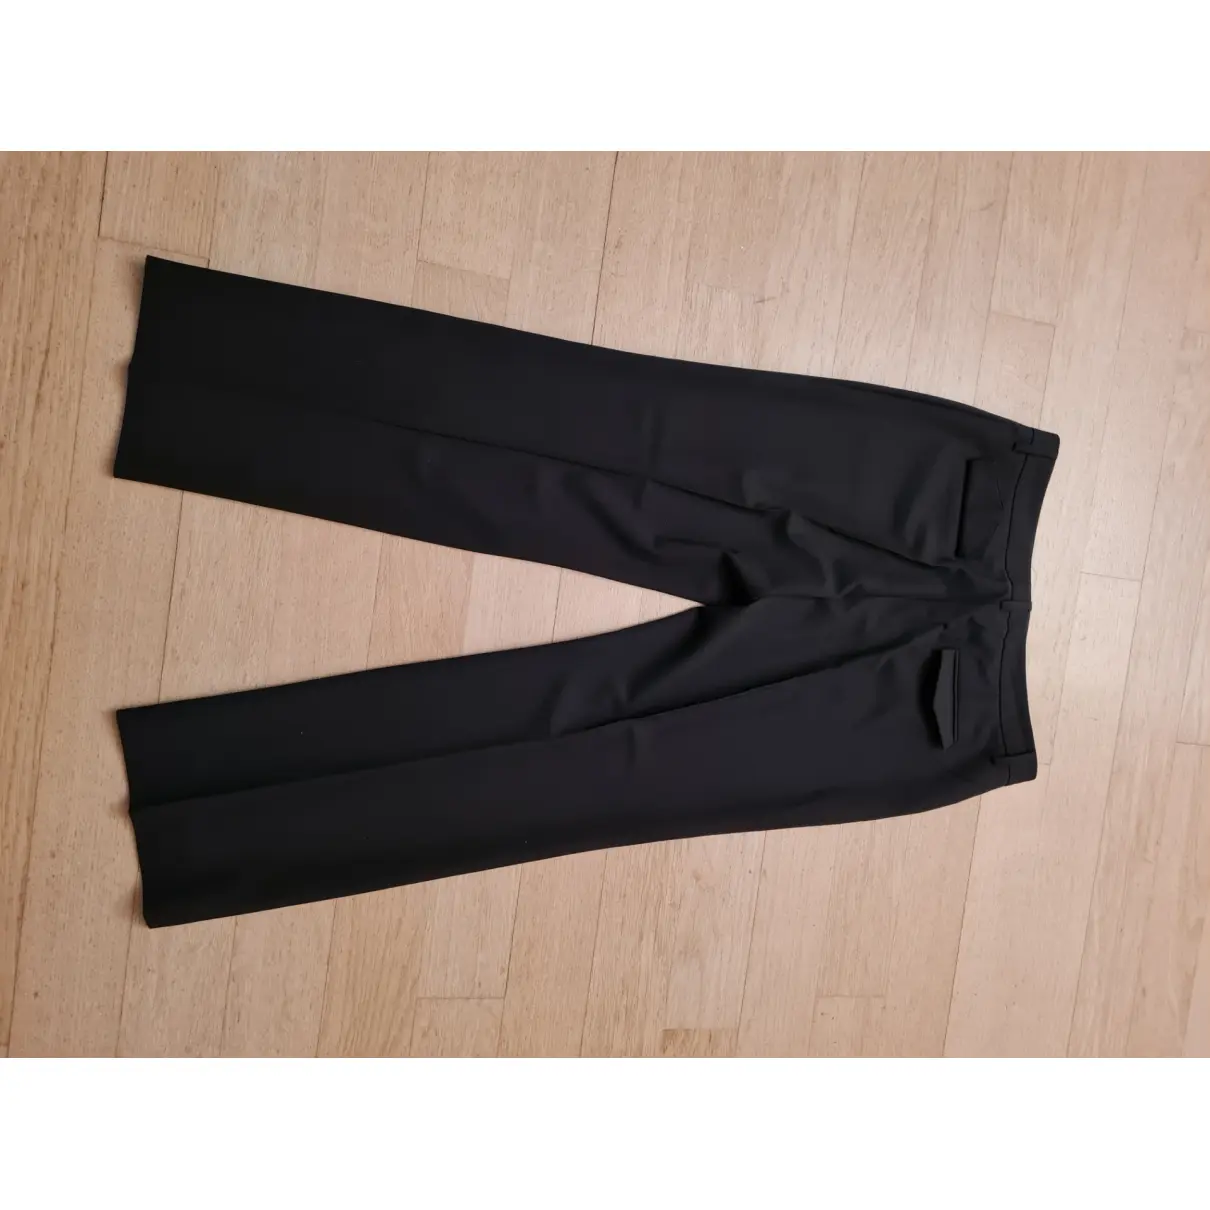 Buy Cantarelli Wool trousers online - Vintage